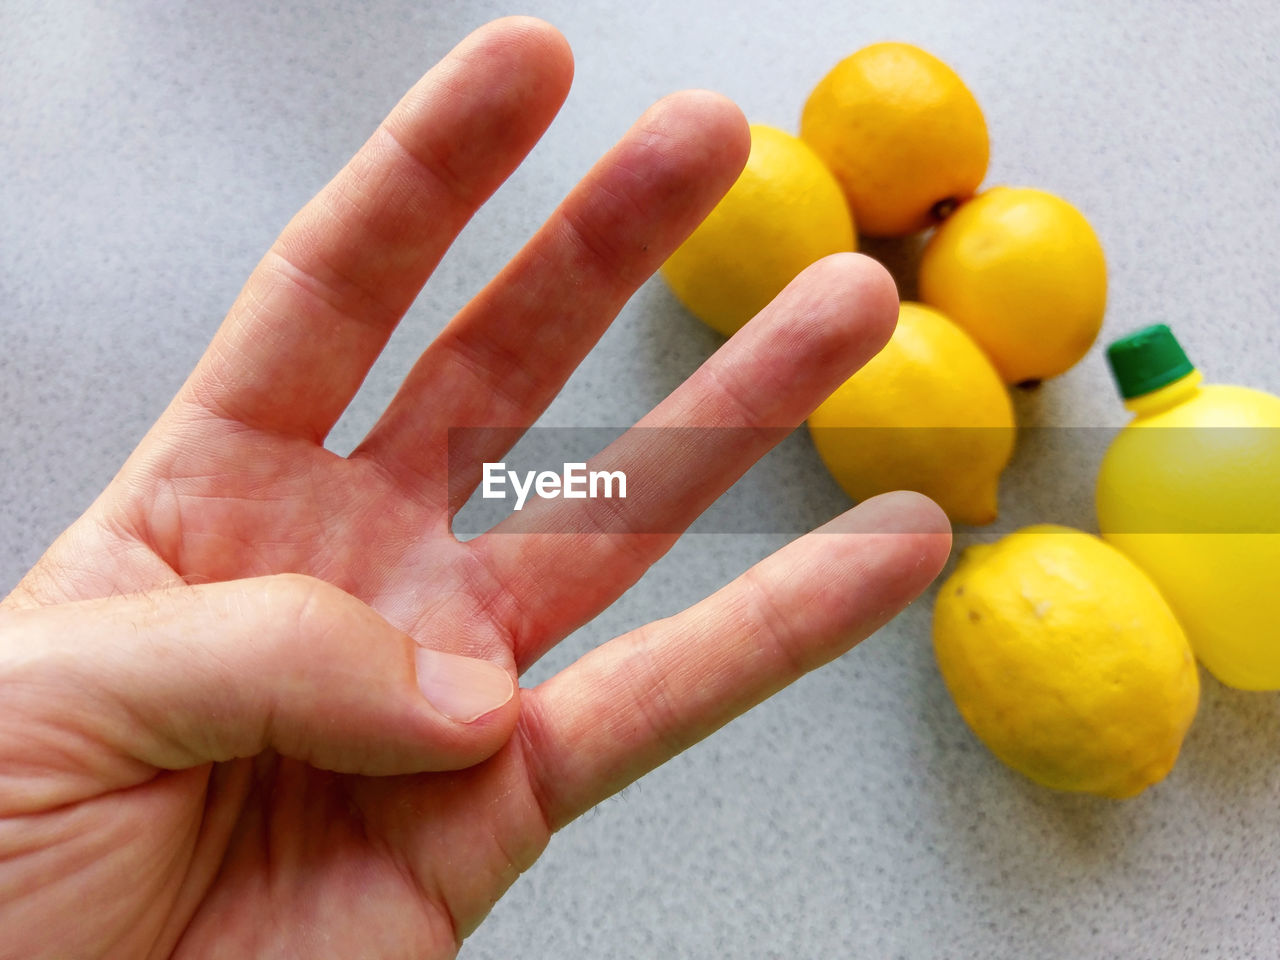 four fingers plus six lemons...well, almost 10 Body Part Citrus Fruit Close-up Counting Finger Food Food And Drink Freshness Fruit Hand Healthy Eating Human Body Part Human Finger Human Hand Lemon Lemon Concentrate Lemons Personal Perspective Still Life Ten Yellow Yellow Color